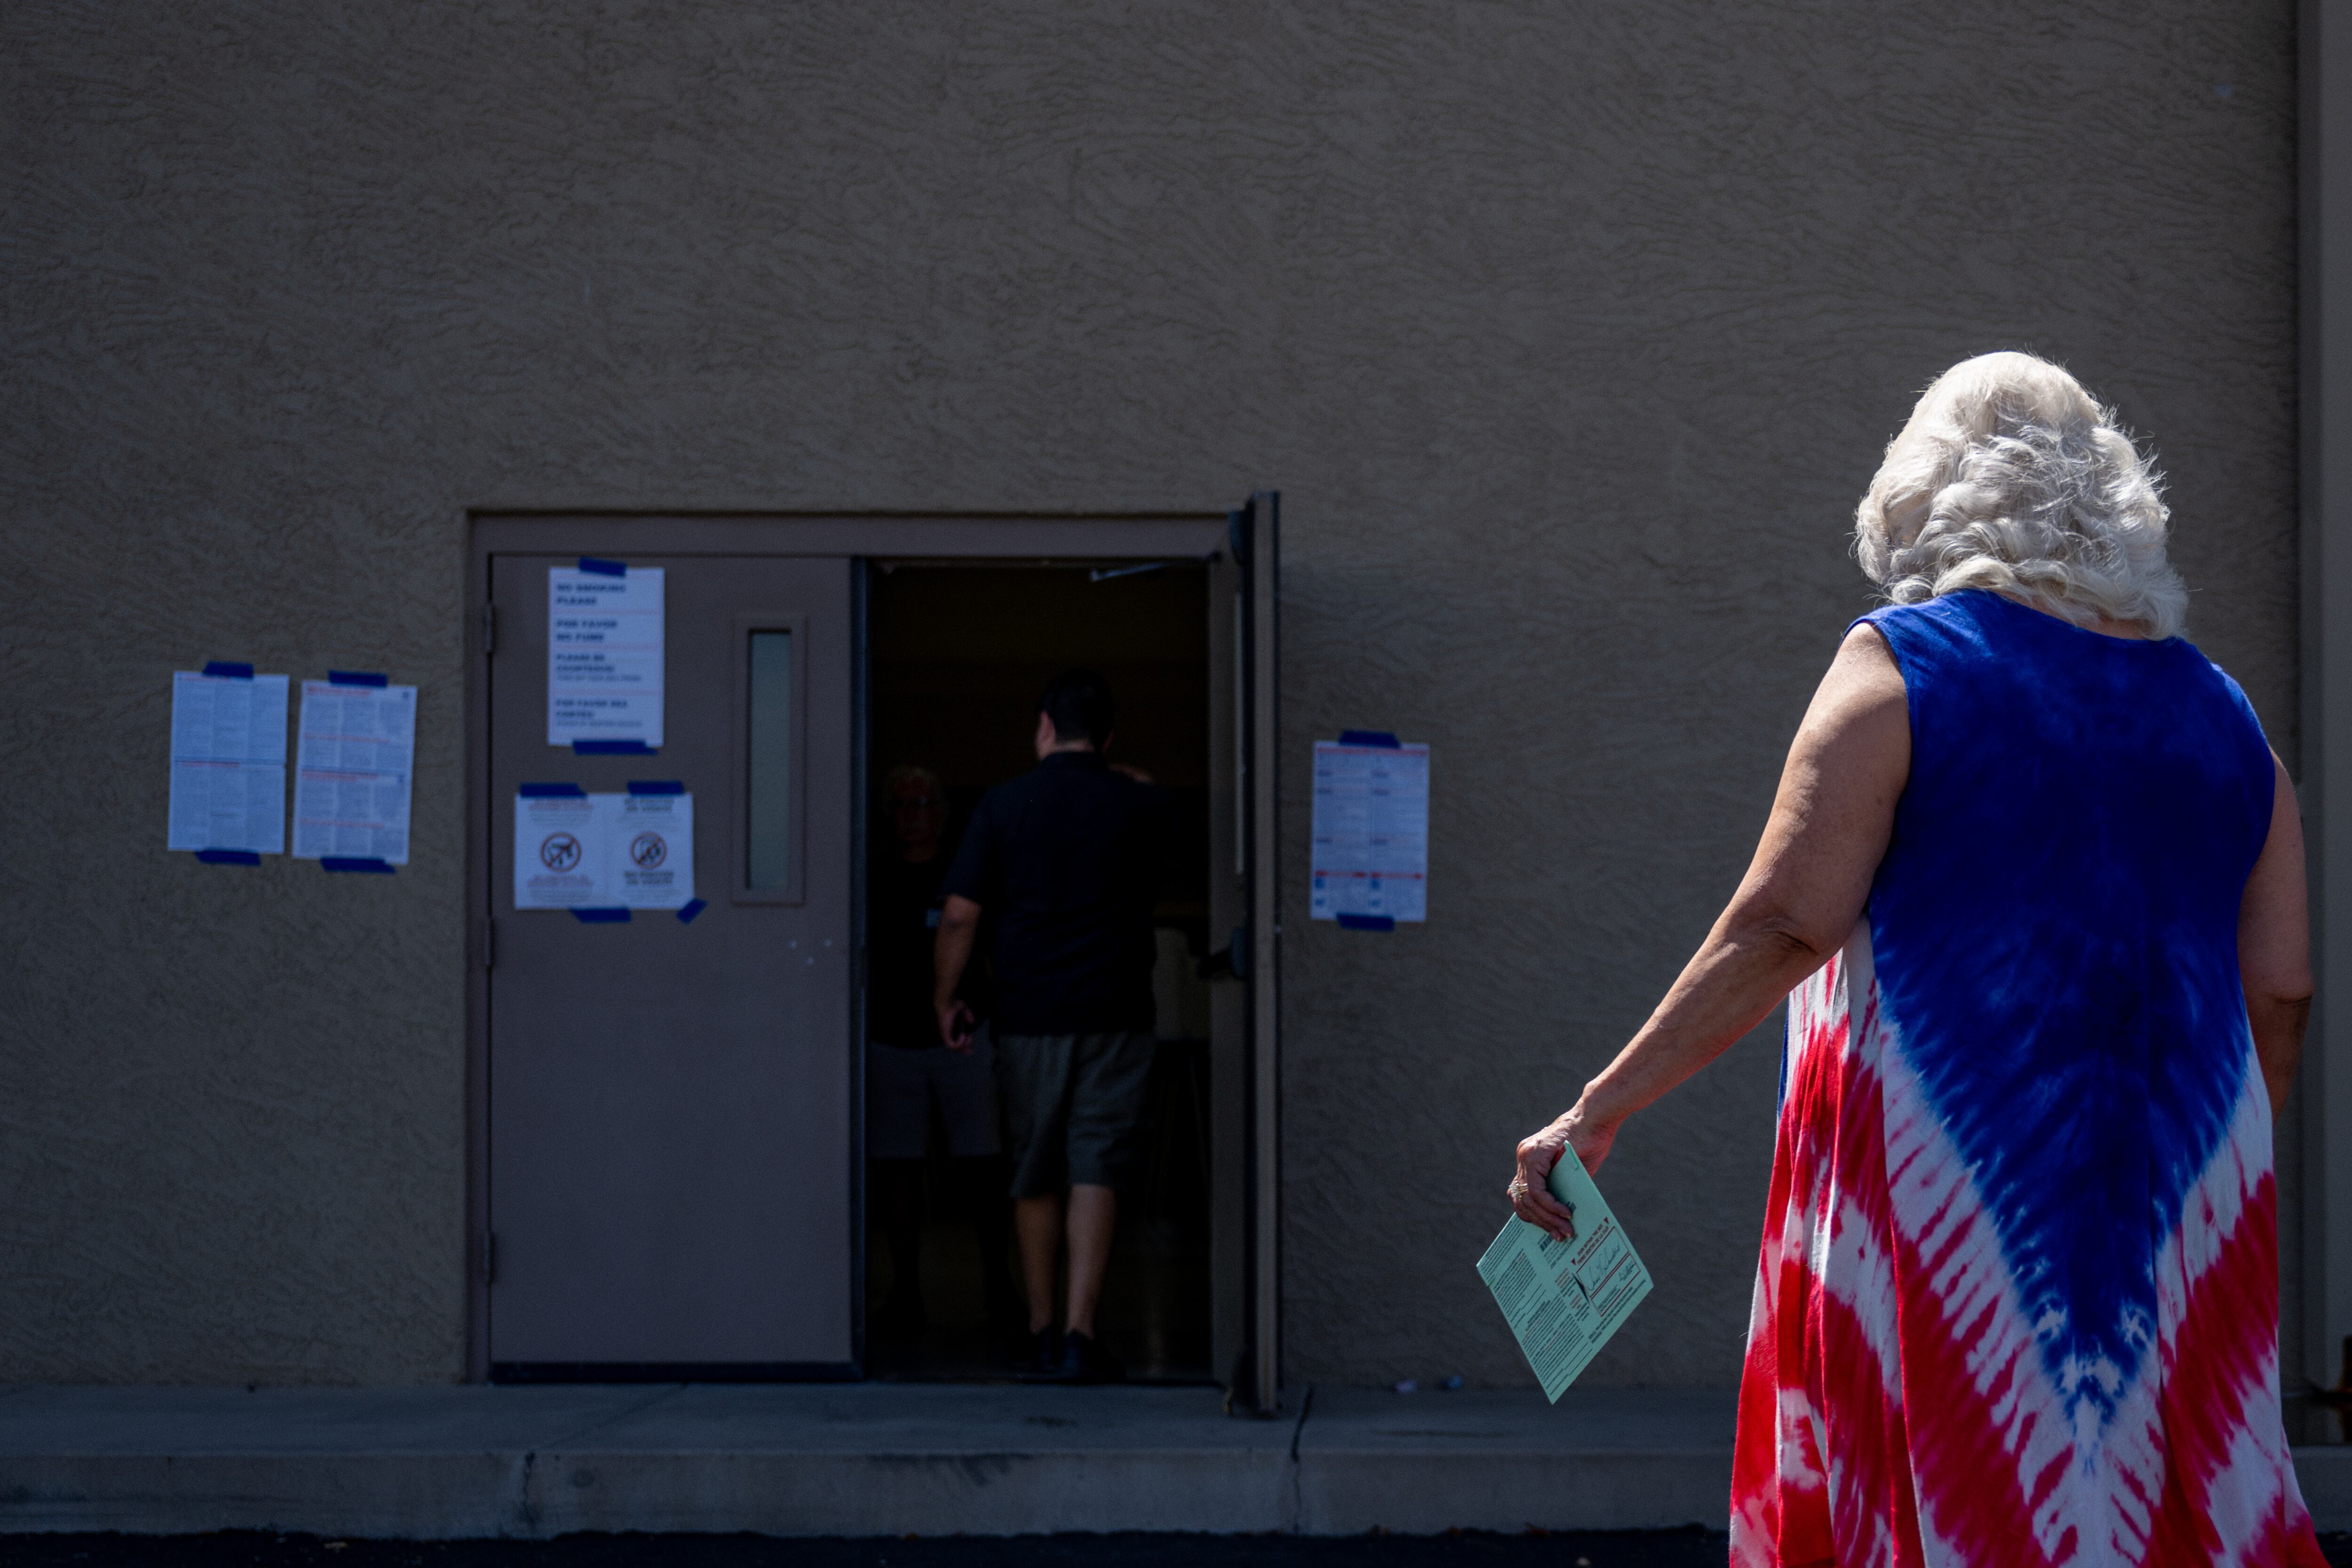 A woman in a red, white, and blue dress approaches an open door.